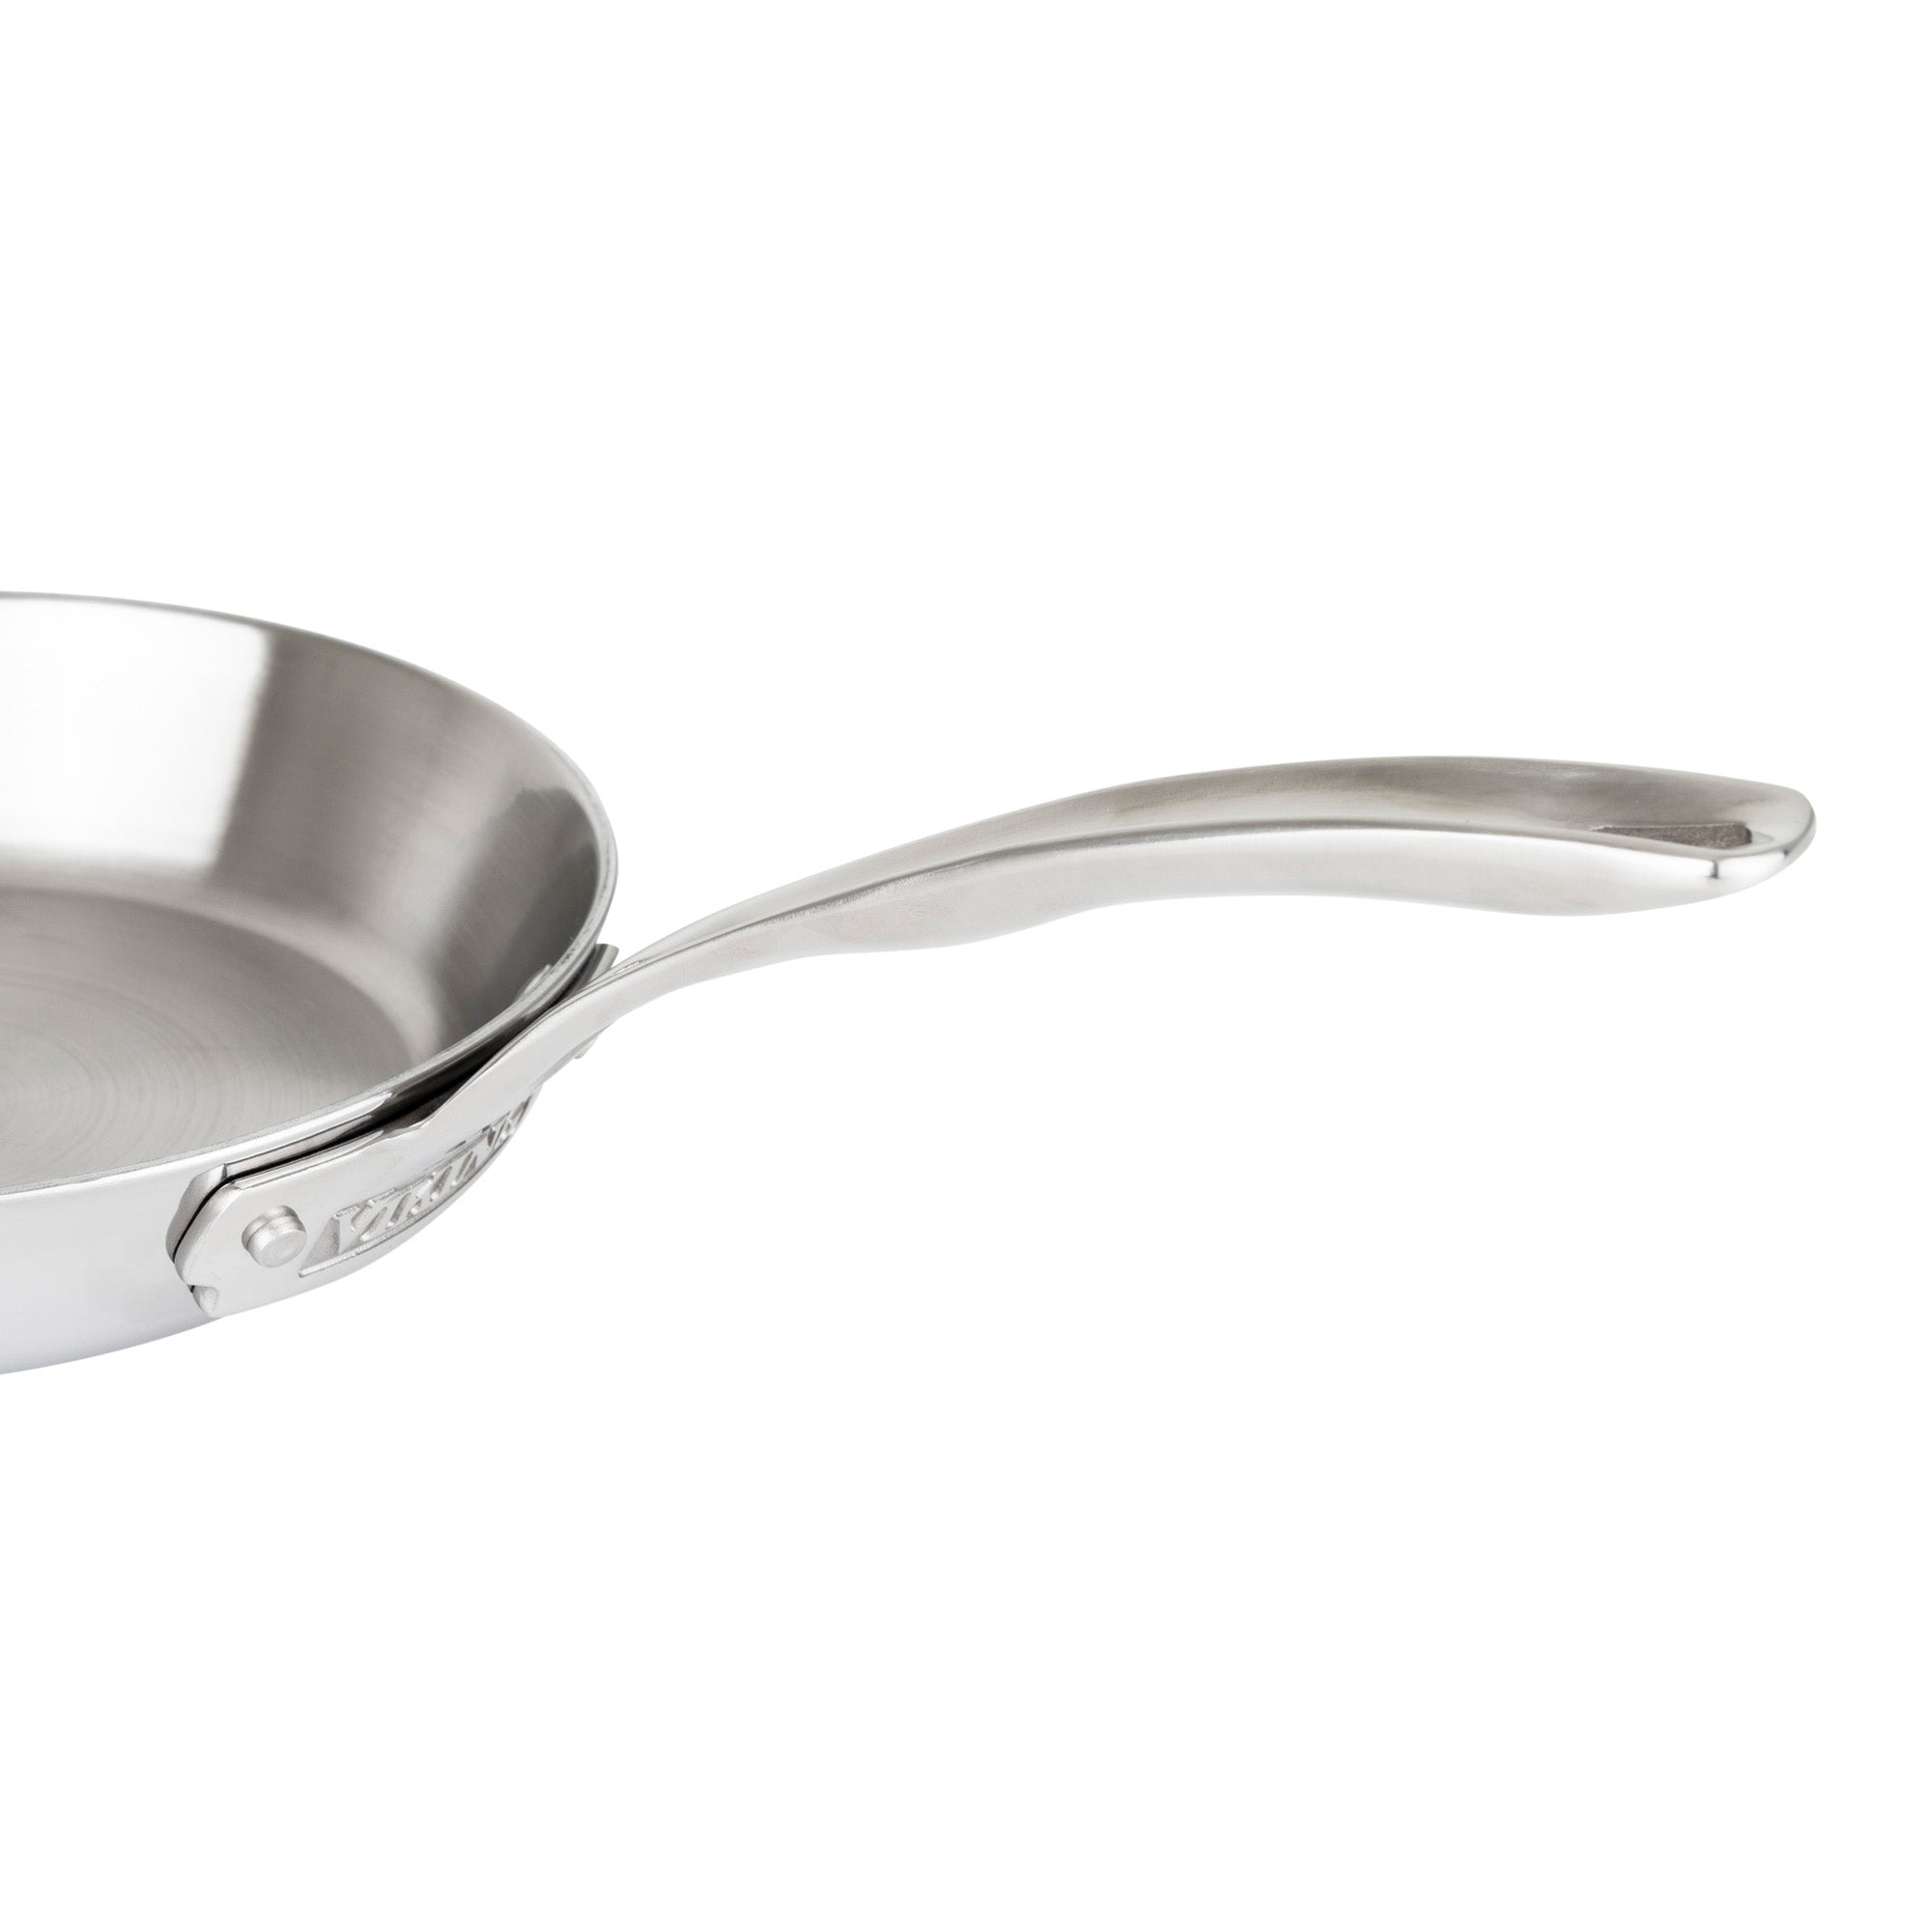 Viking 3-Ply Stainless Steel 2-Piece Nonstick Fry Pan Set – Viking Culinary  Products